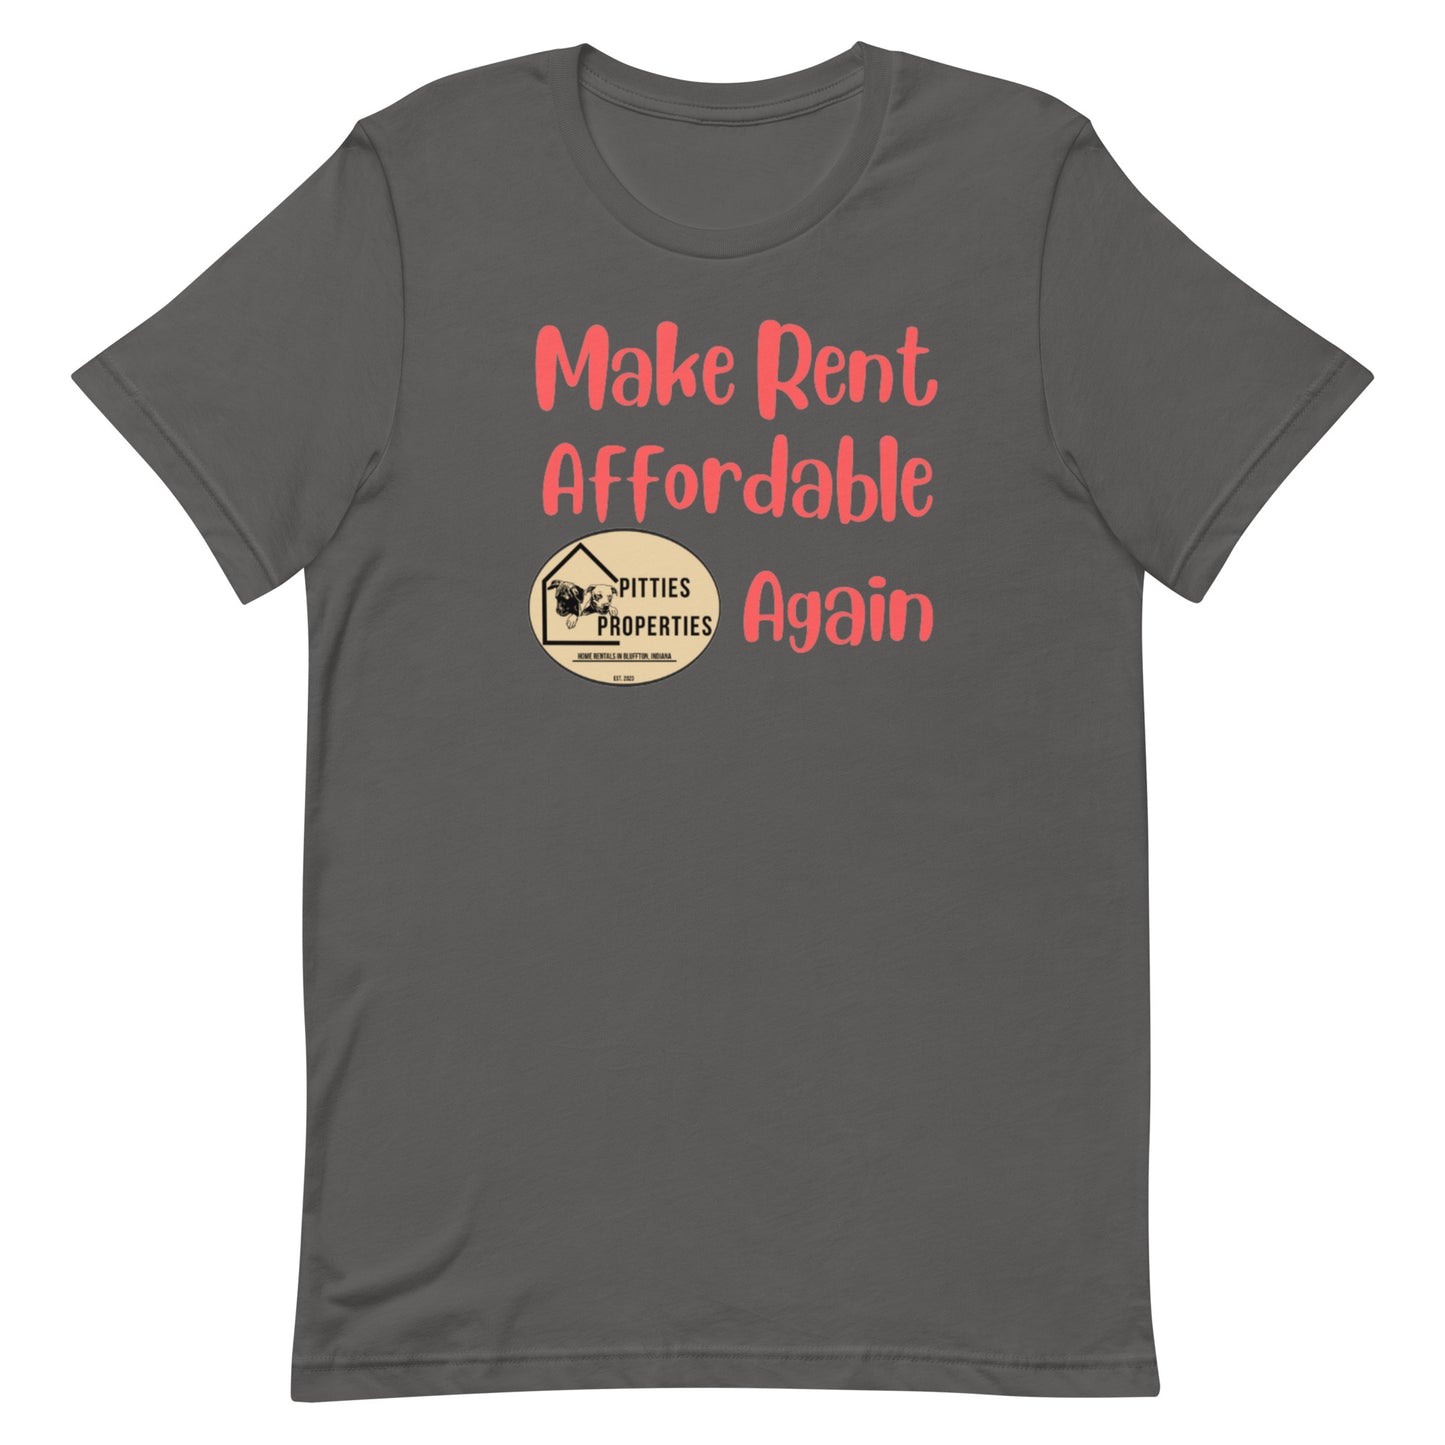 Pitties Properties focuses on affordability with our rentals. Wear this shirt proudly around town and let everyone know to Make Rent Affordable Again.